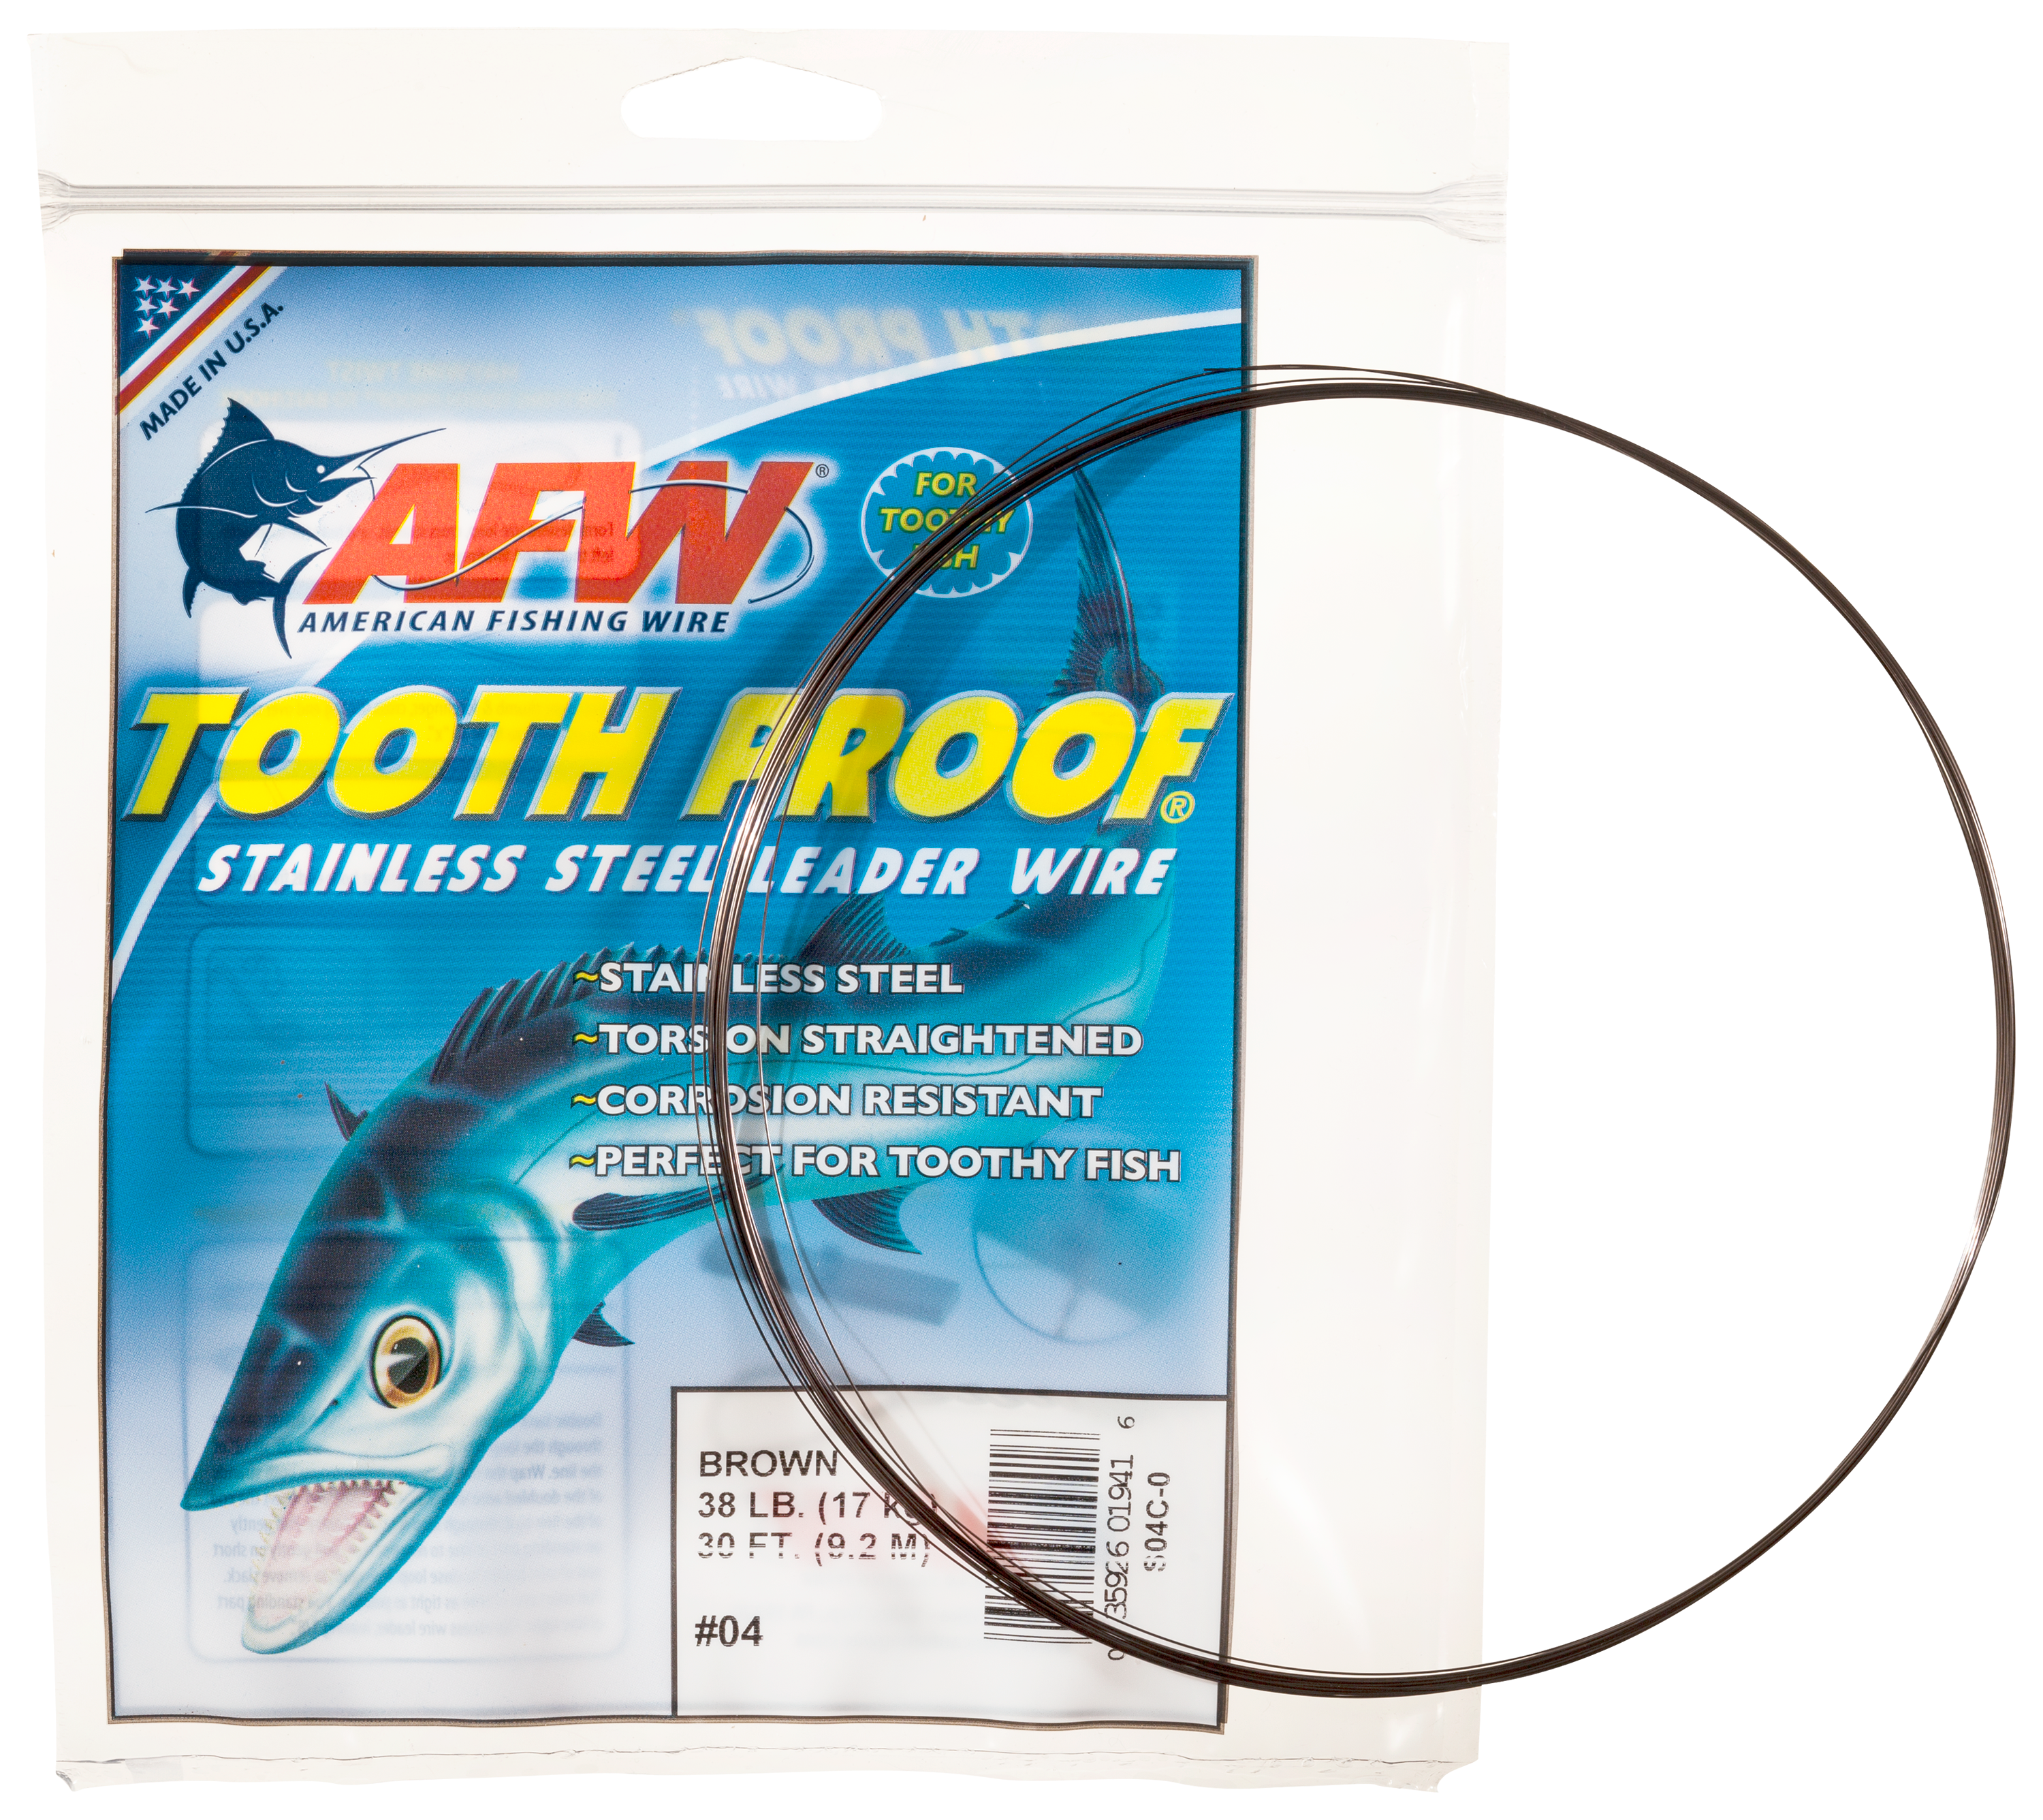 American Fishing Wire Tooth Proof Stainless Steel Leader Wire - 174 lb. Test